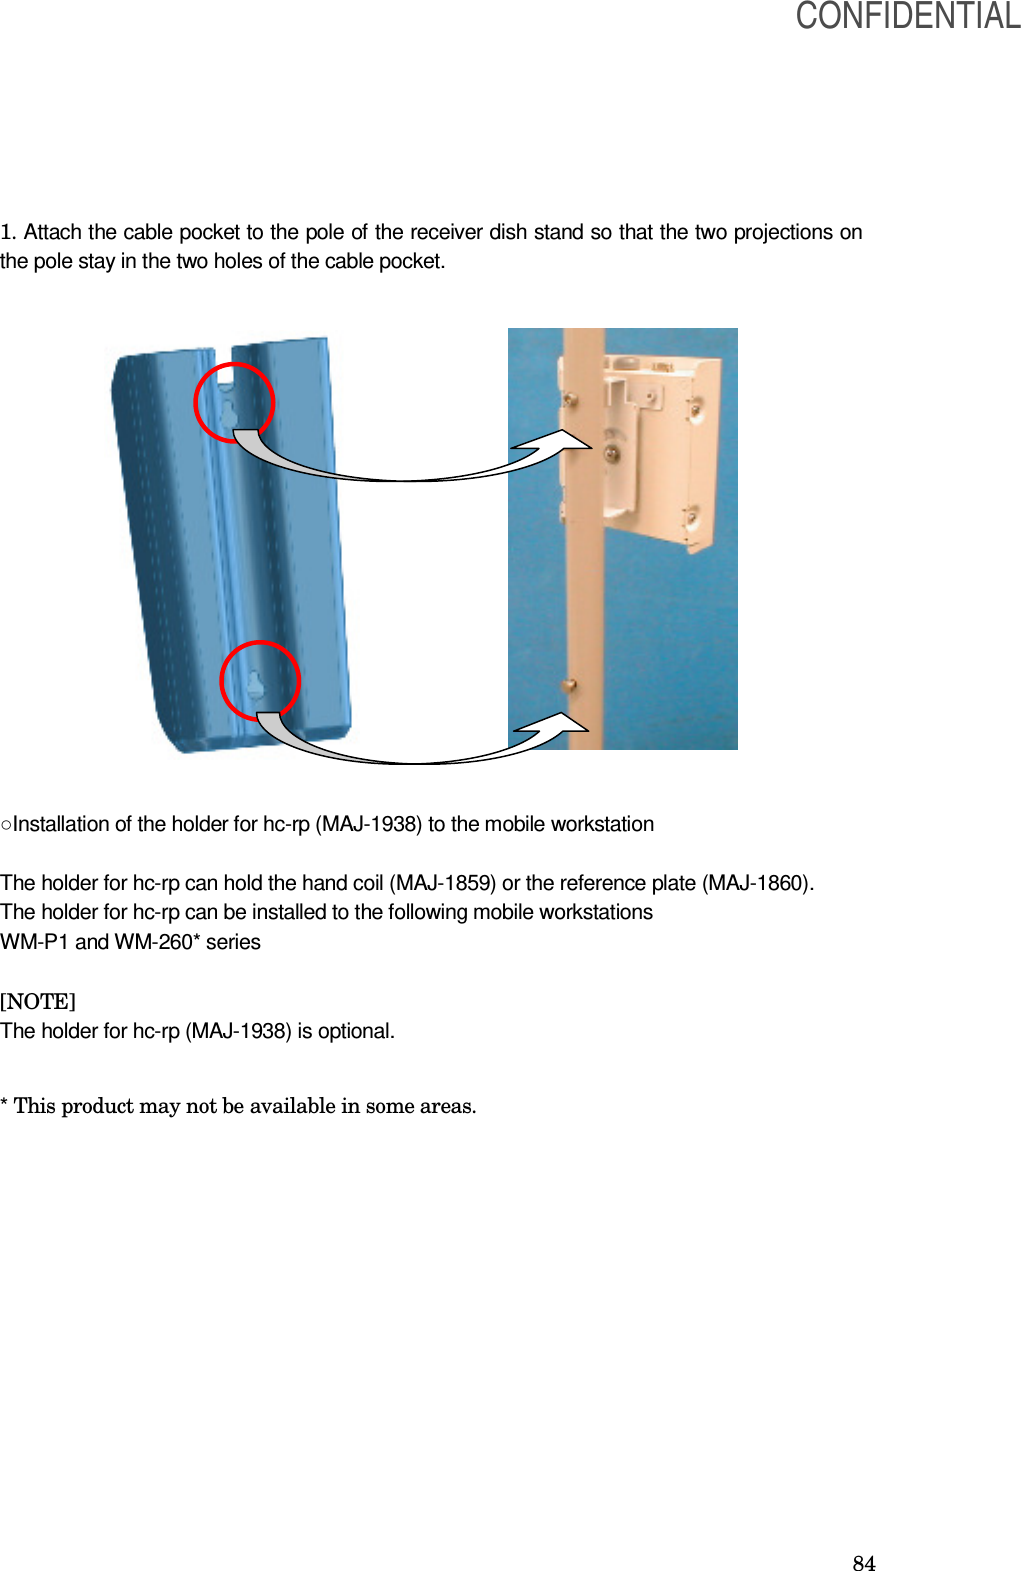  84 1. Attach the cable pocket to the pole of the receiver dish stand so that the two projections on the pole stay in the two holes of the cable pocket.                   ○Installation of the holder for hc-rp (MAJ-1938) to the mobile workstation  The holder for hc-rp can hold the hand coil (MAJ-1859) or the reference plate (MAJ-1860). The holder for hc-rp can be installed to the following mobile workstations WM-P1 and WM-260* series  [NOTE] The holder for hc-rp (MAJ-1938) is optional.  * This product may not be available in some areas.   CONFIDENTIAL